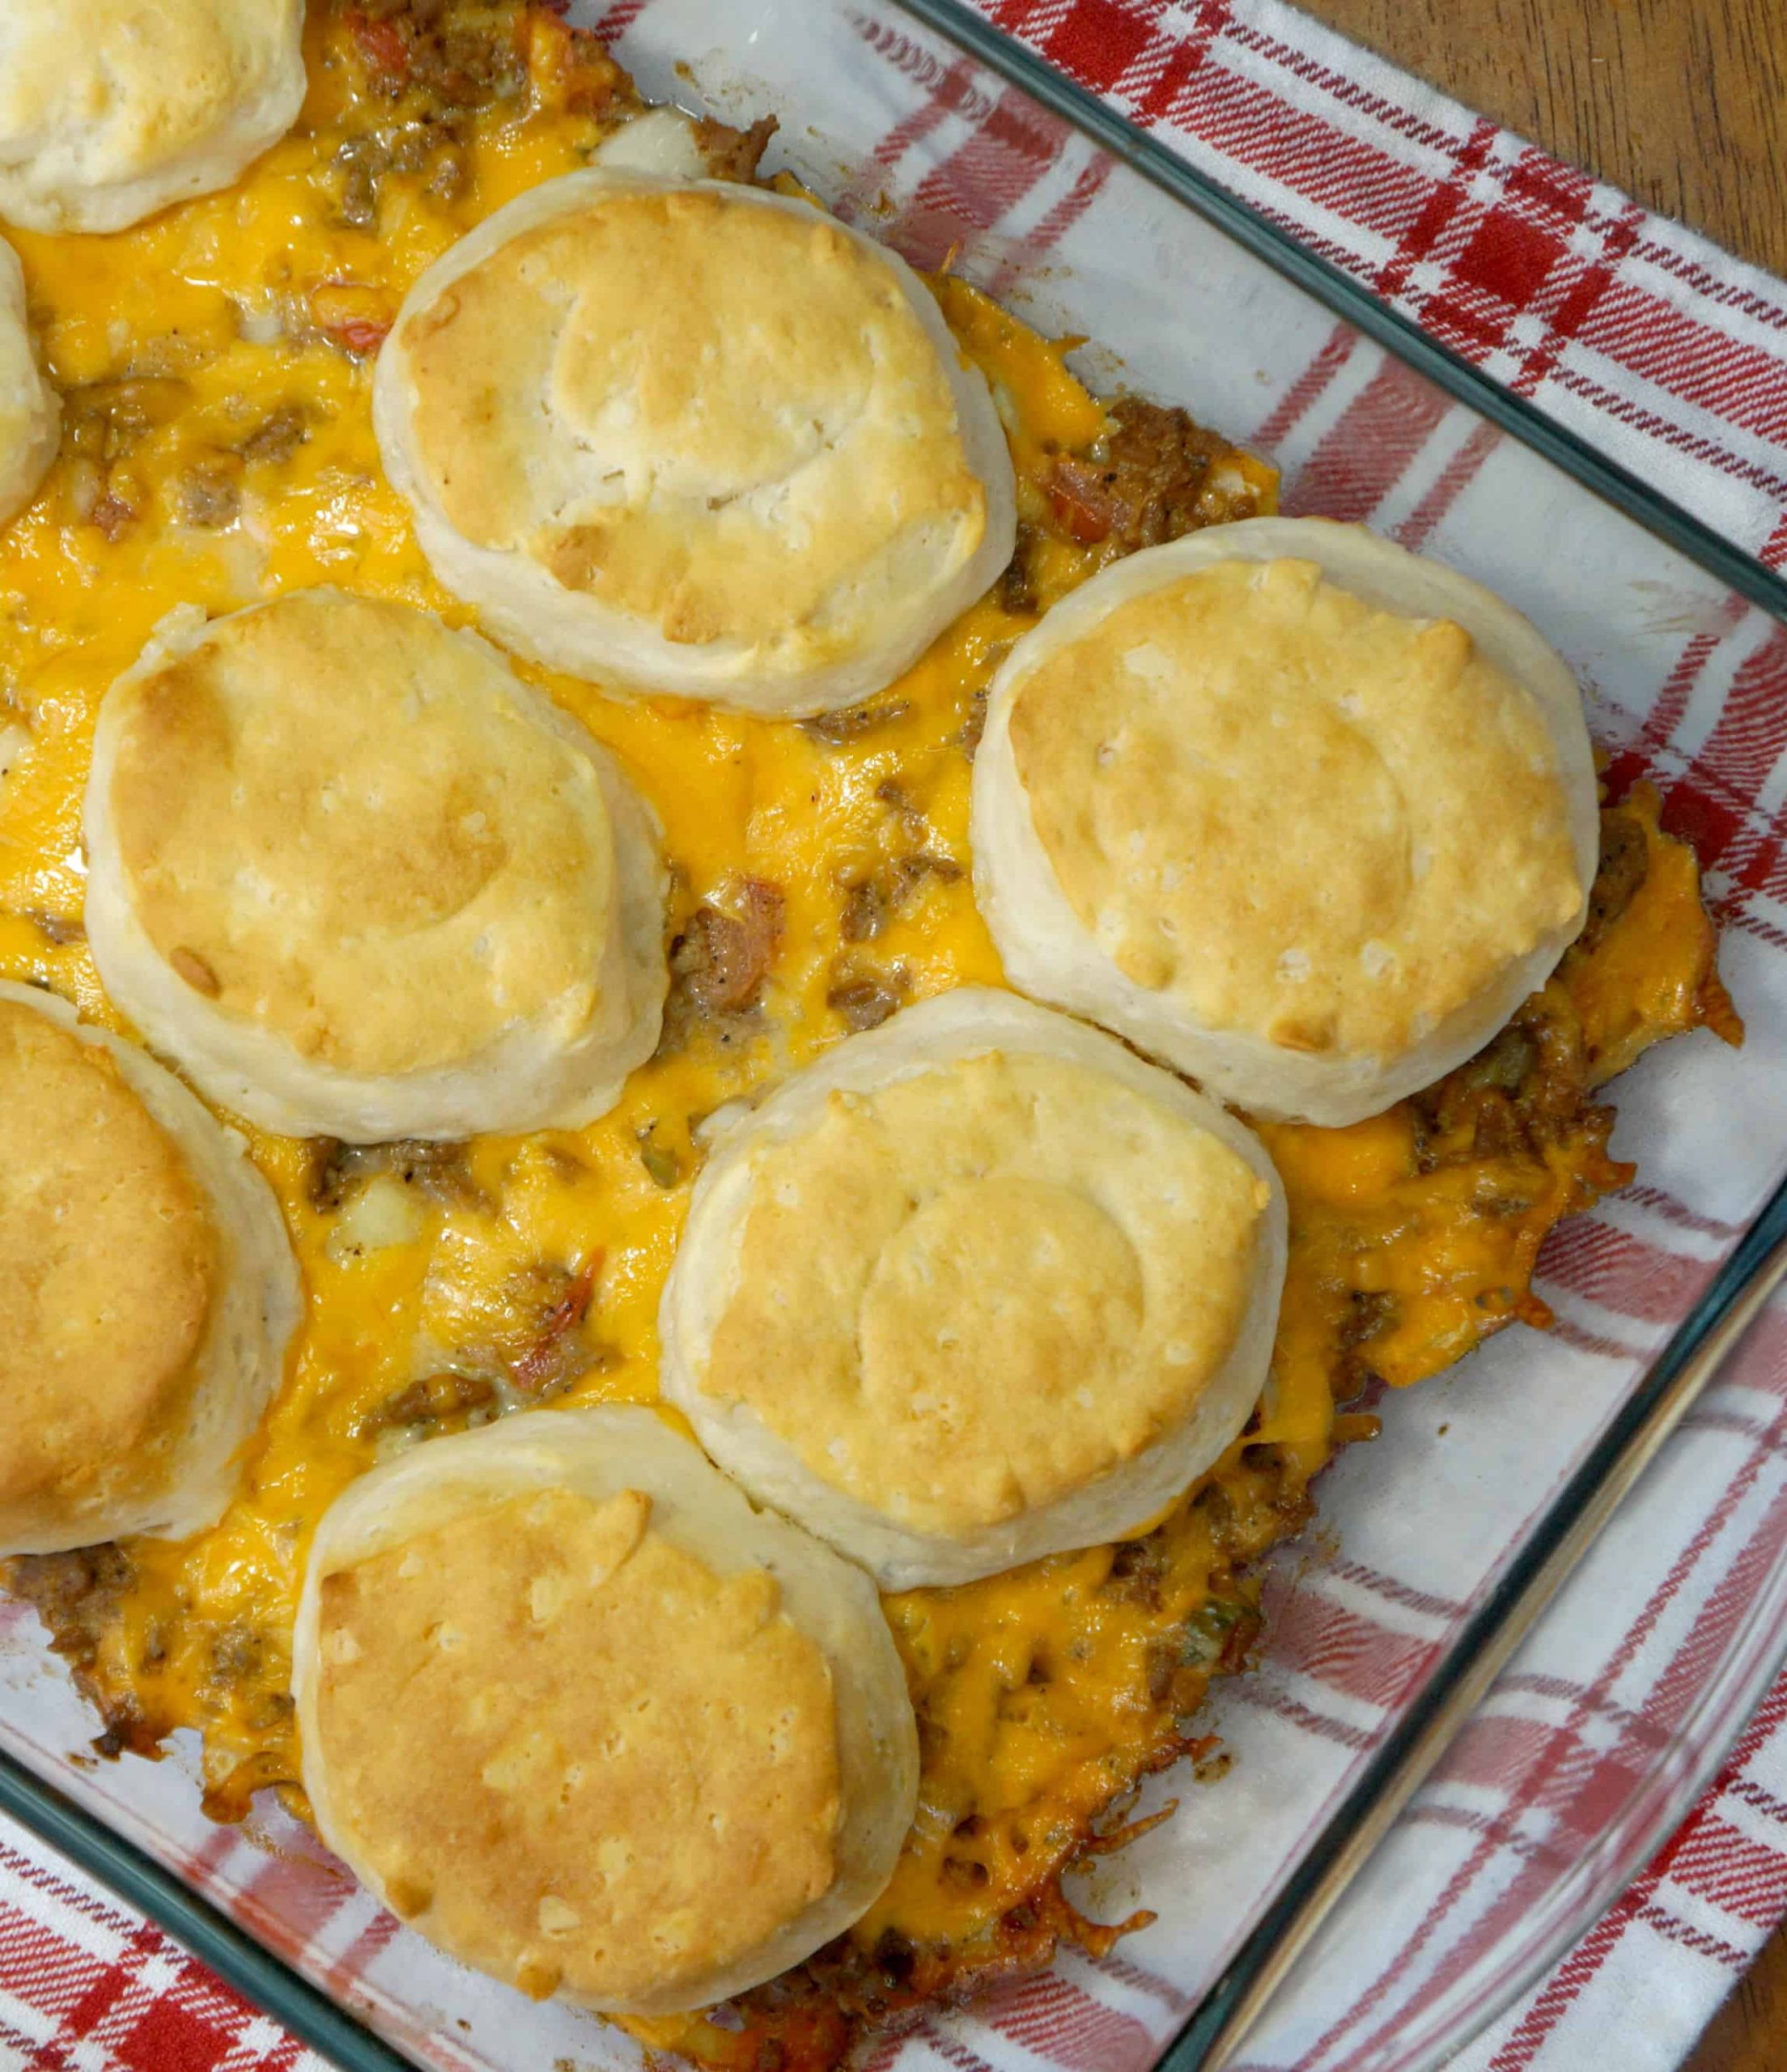 Ground Beef And Biscuit Recipes
 Cheeseburger Casserole with Pillsbury Biscuits This is